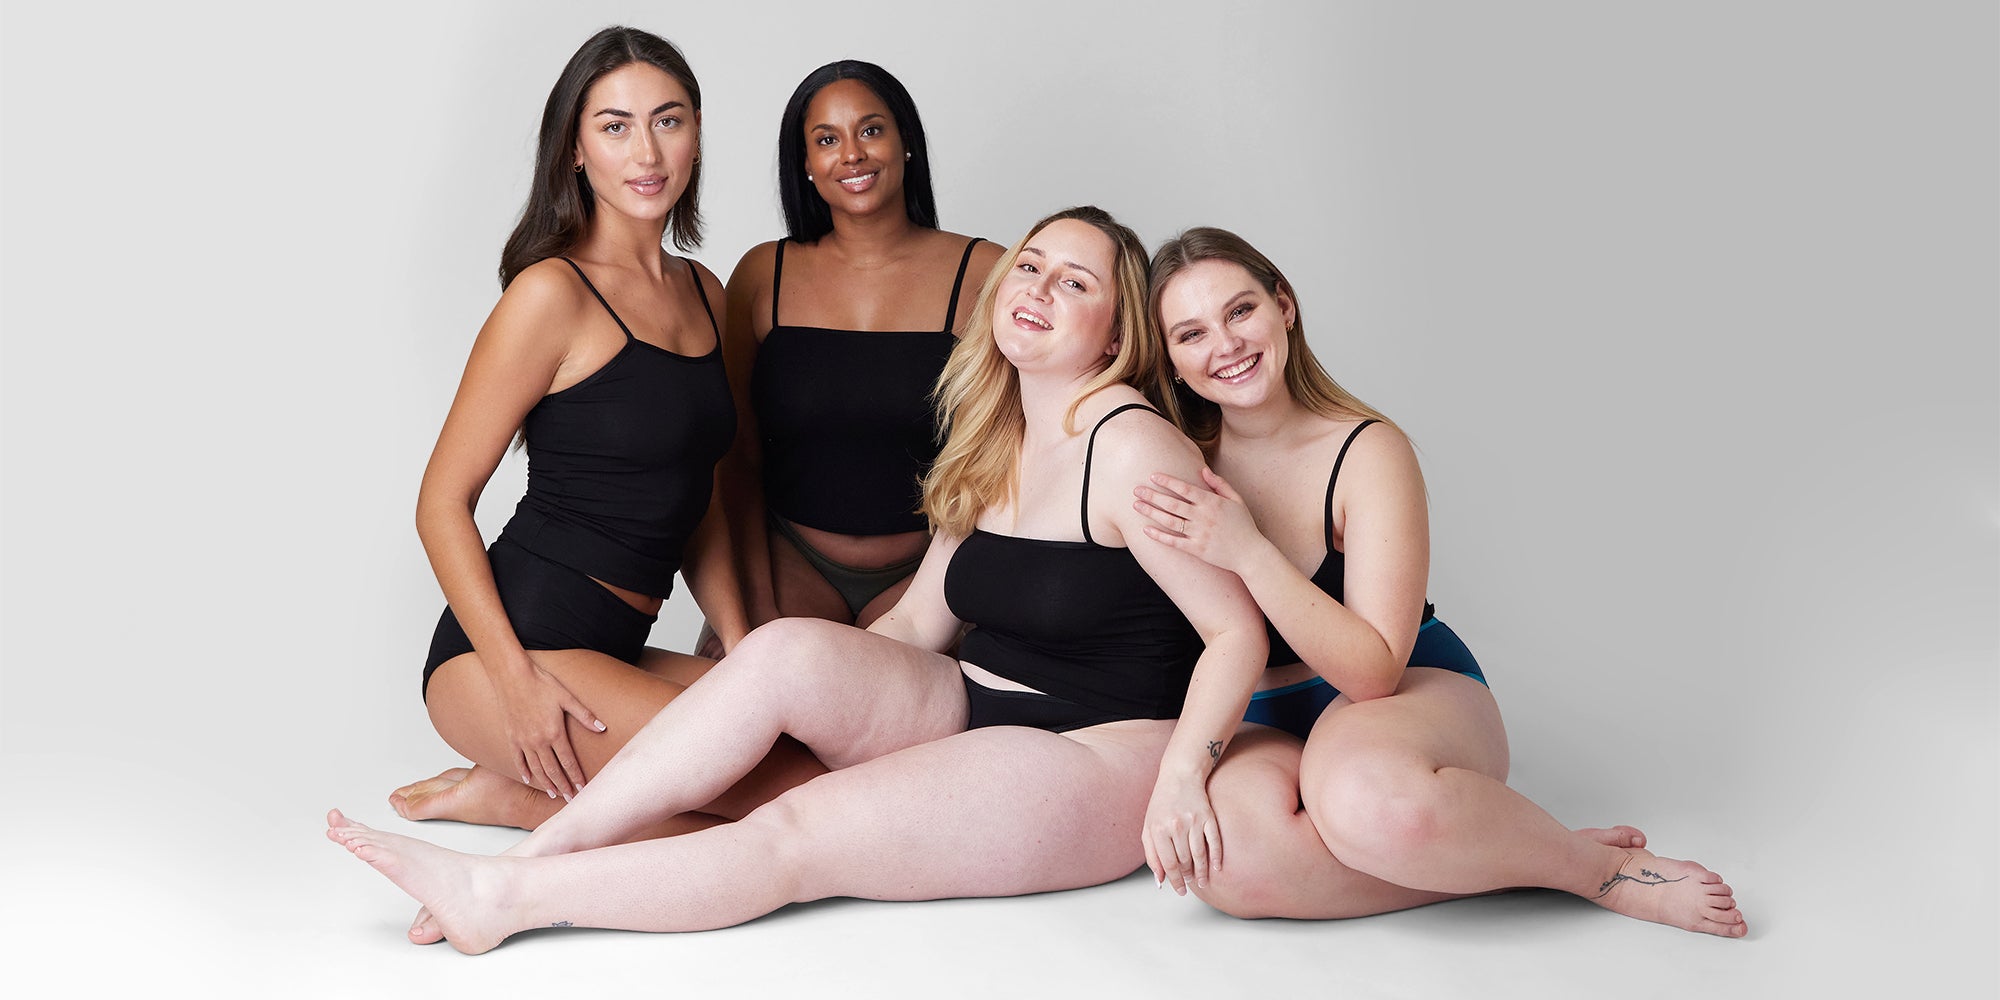 4 models sat on the floor in period pants for the blog how do period pants work? a guide on how they'll change your life